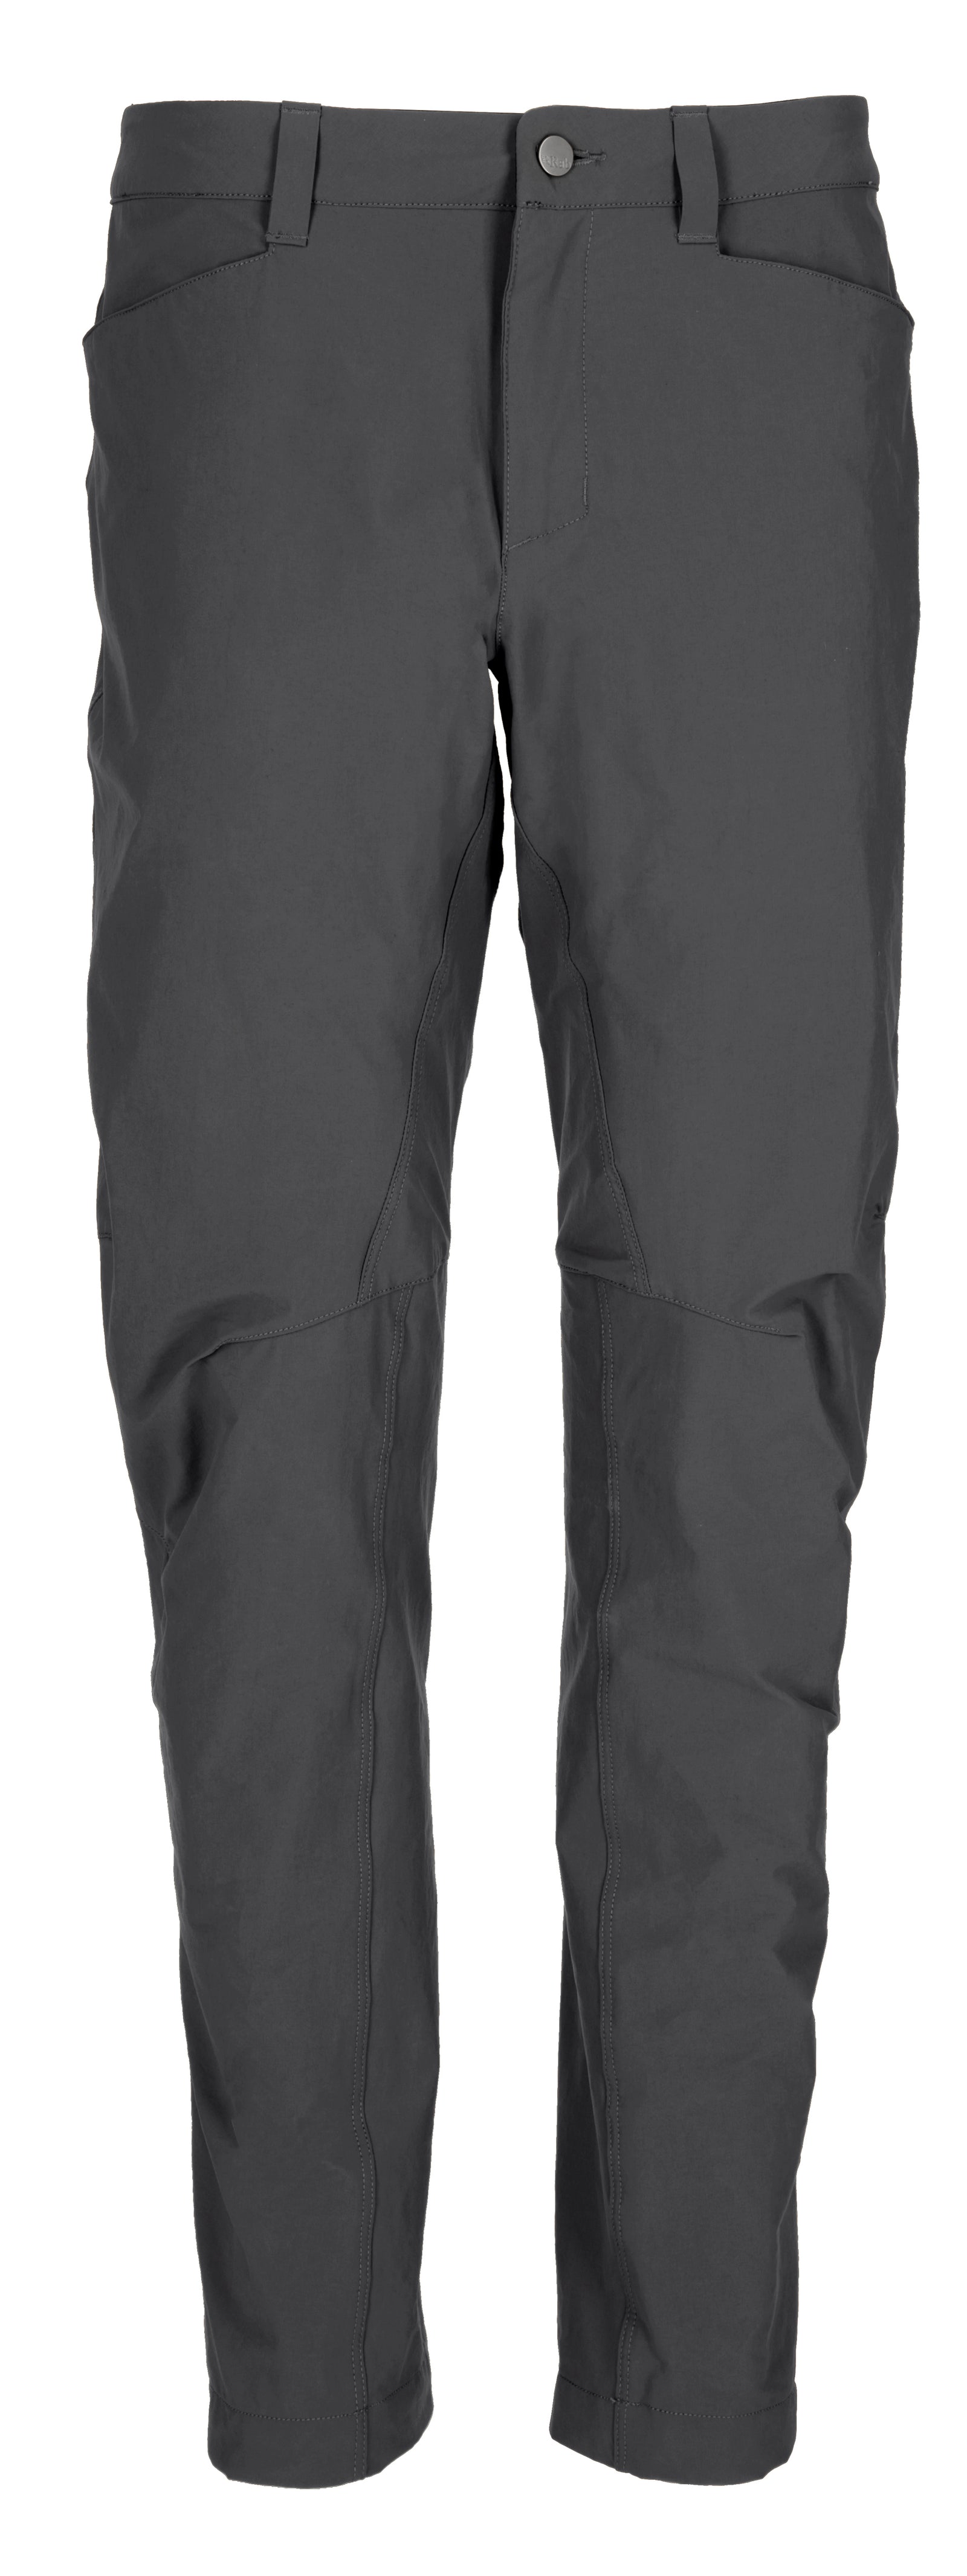 Mens Pants - Outfitters Store